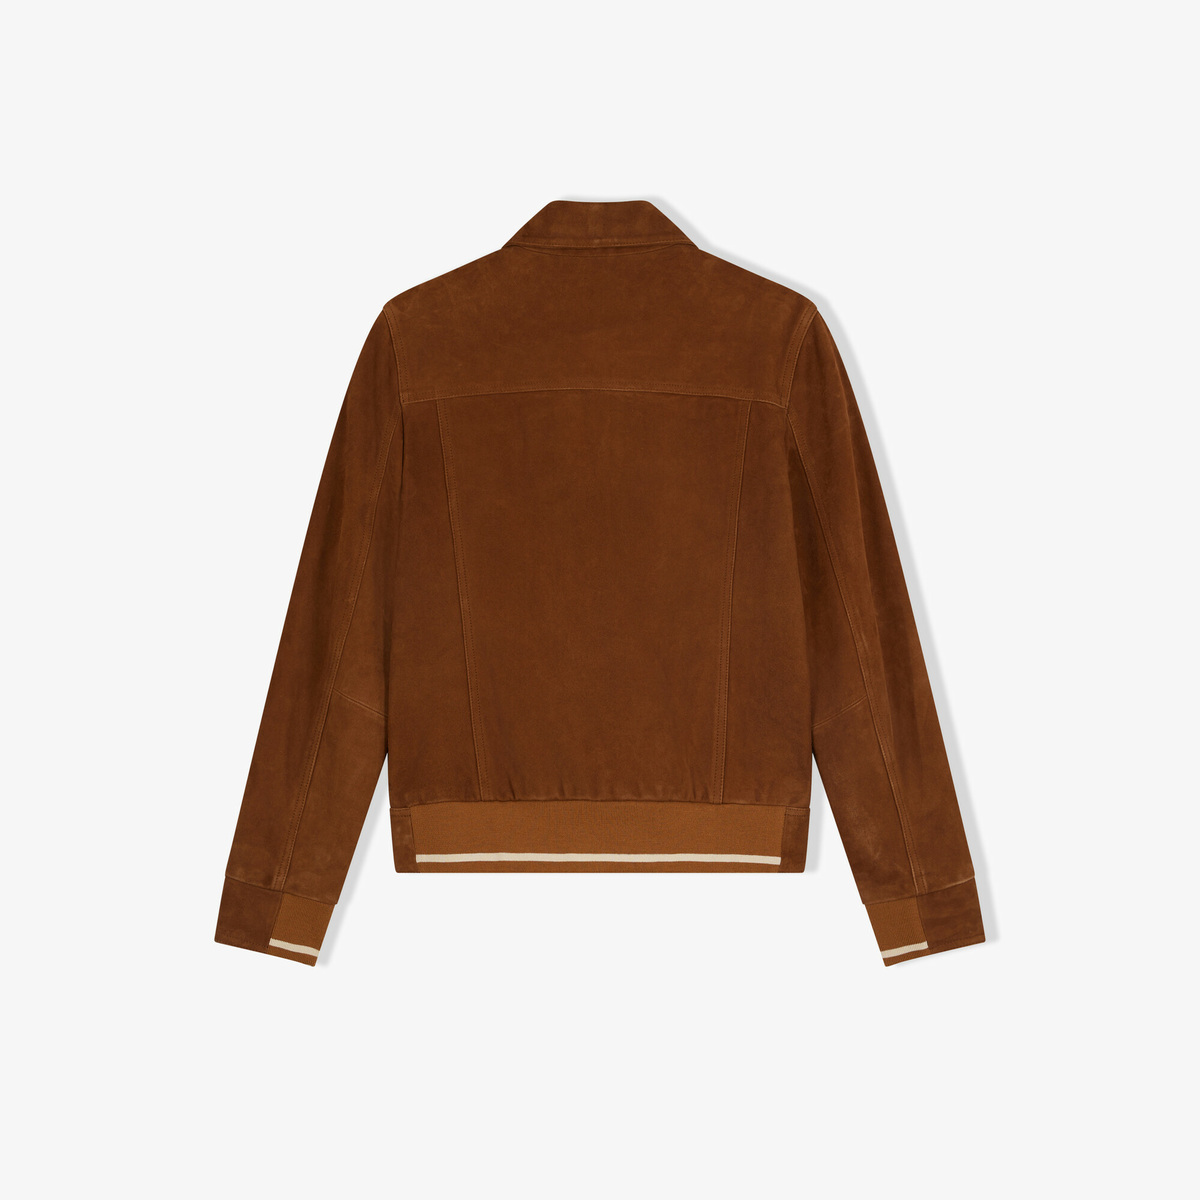 Camel Suede Jacket, Camel - Straight cut - Suede leather - image 2